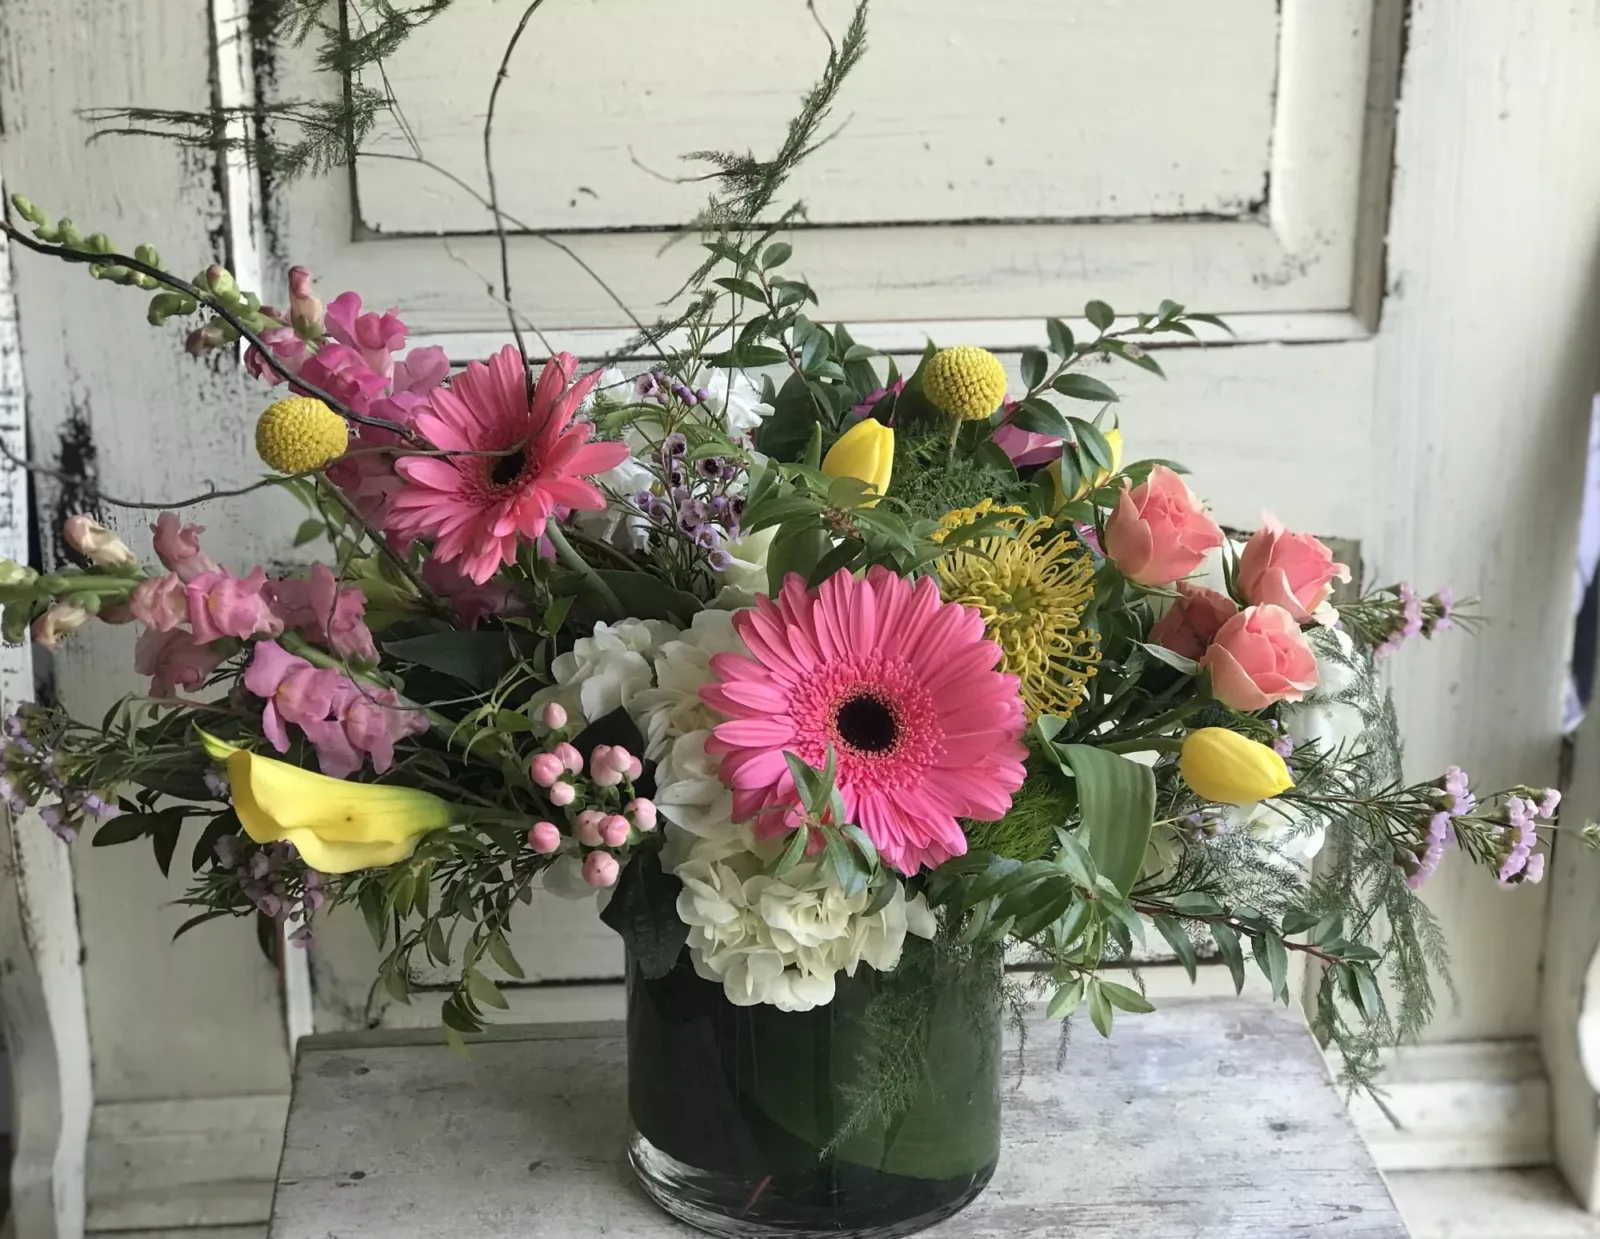 A floral arrangement in a glass bowl with gerbera daisies, mums, stock and more.